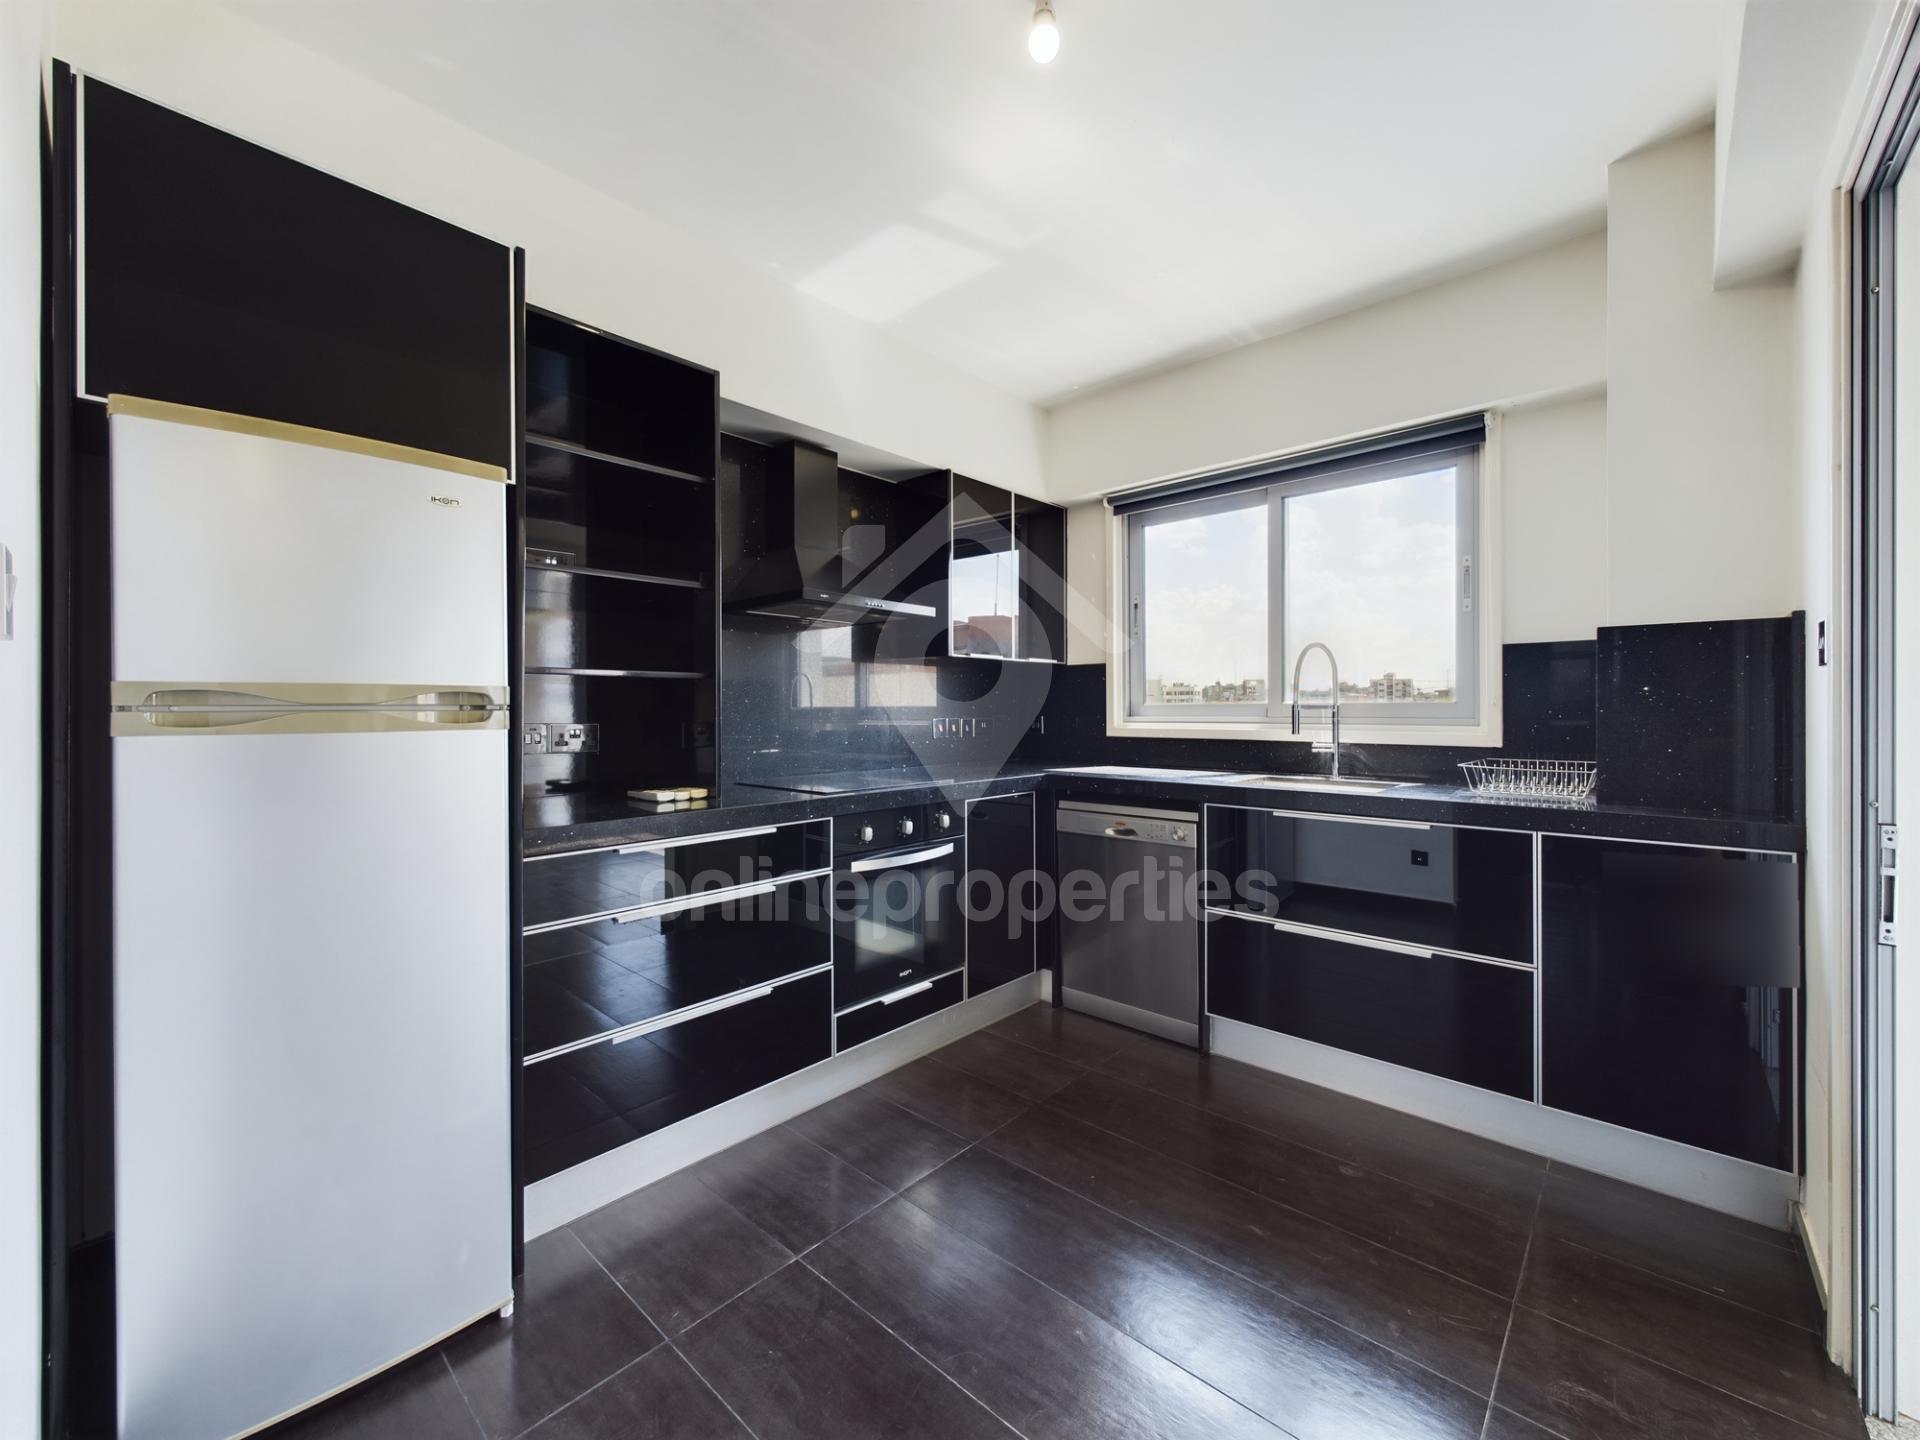 Luxurious interior designed two bedroom flat, perfect central location 